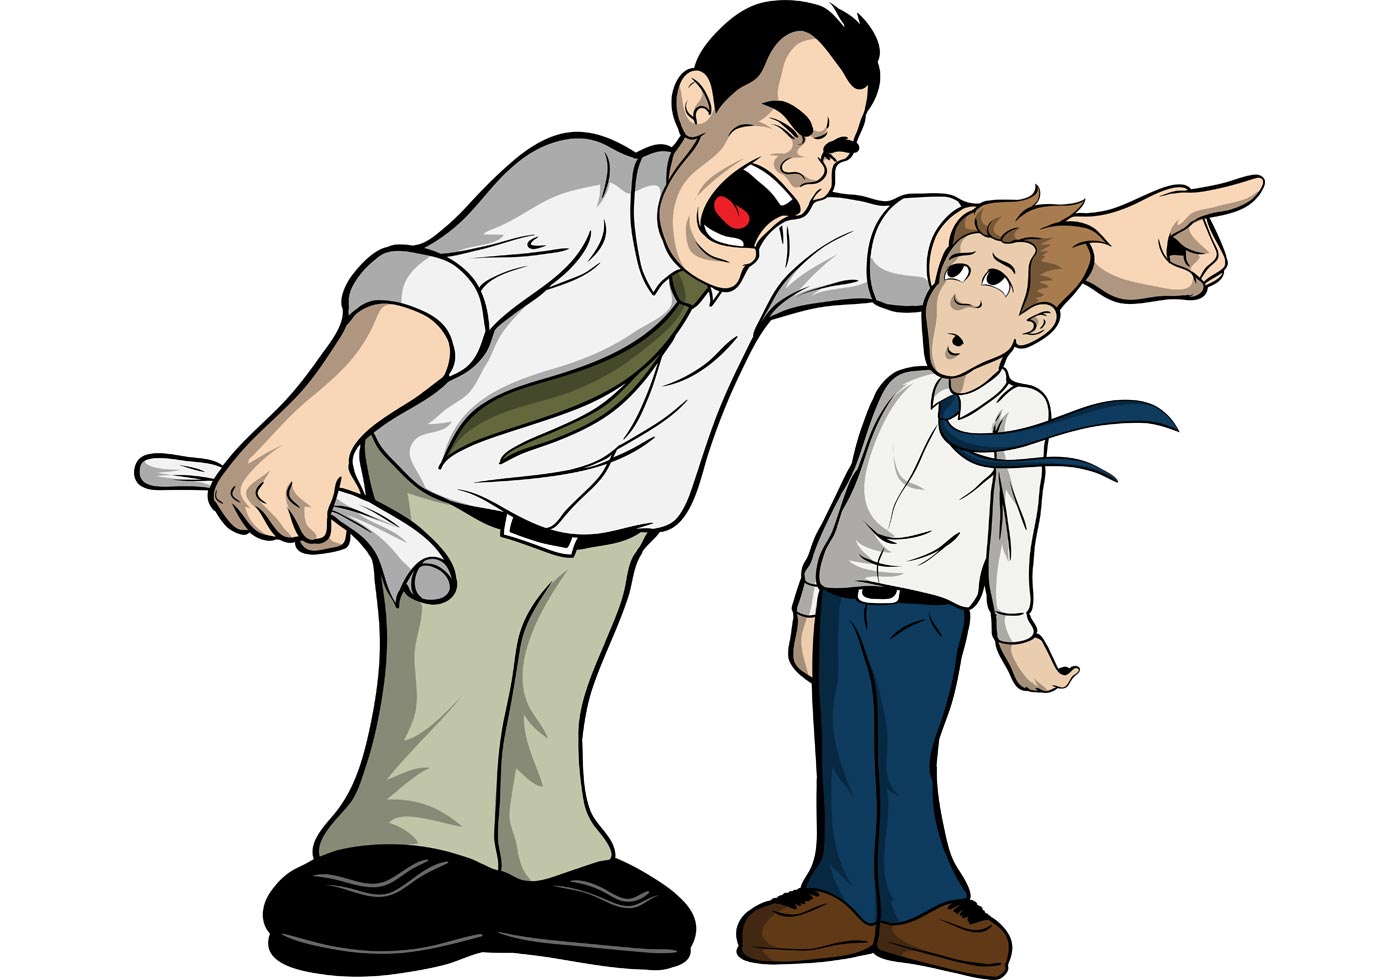 Clip Arts Related To : boss cartoon pointing finger. 